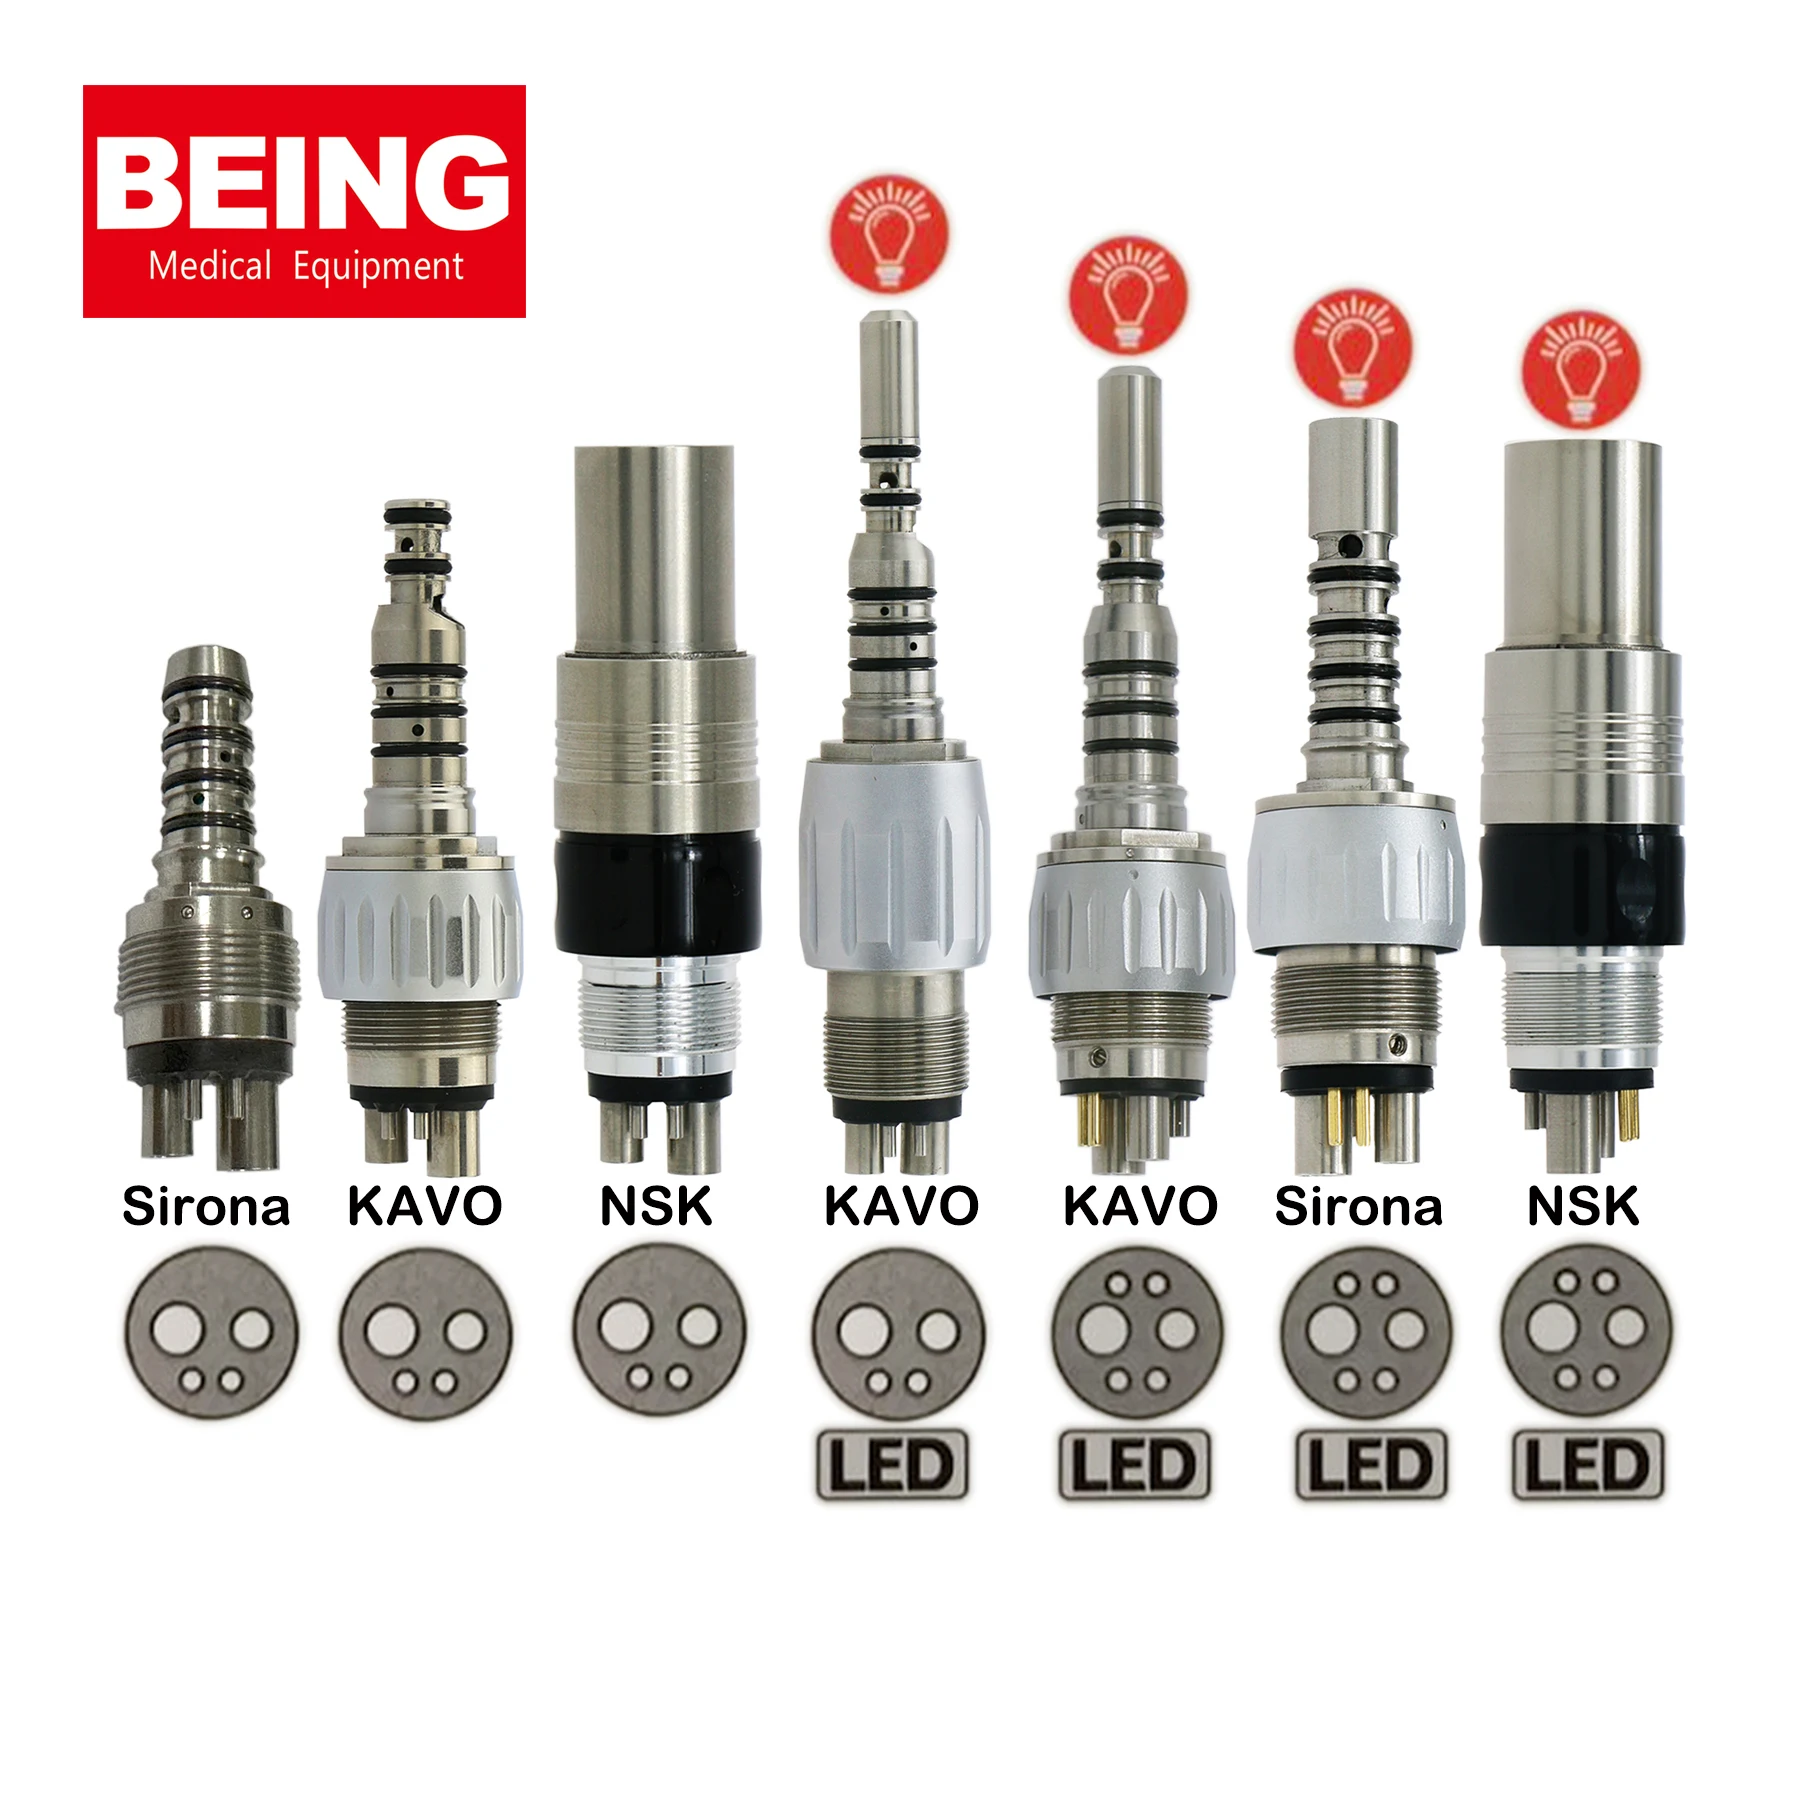 Being Dental Coupling 4Holes LED Coupler 6Pin 6Holes Adapter For KAVO NSK Sirona LED Fiber Optic High Speed Turbine Handpiece